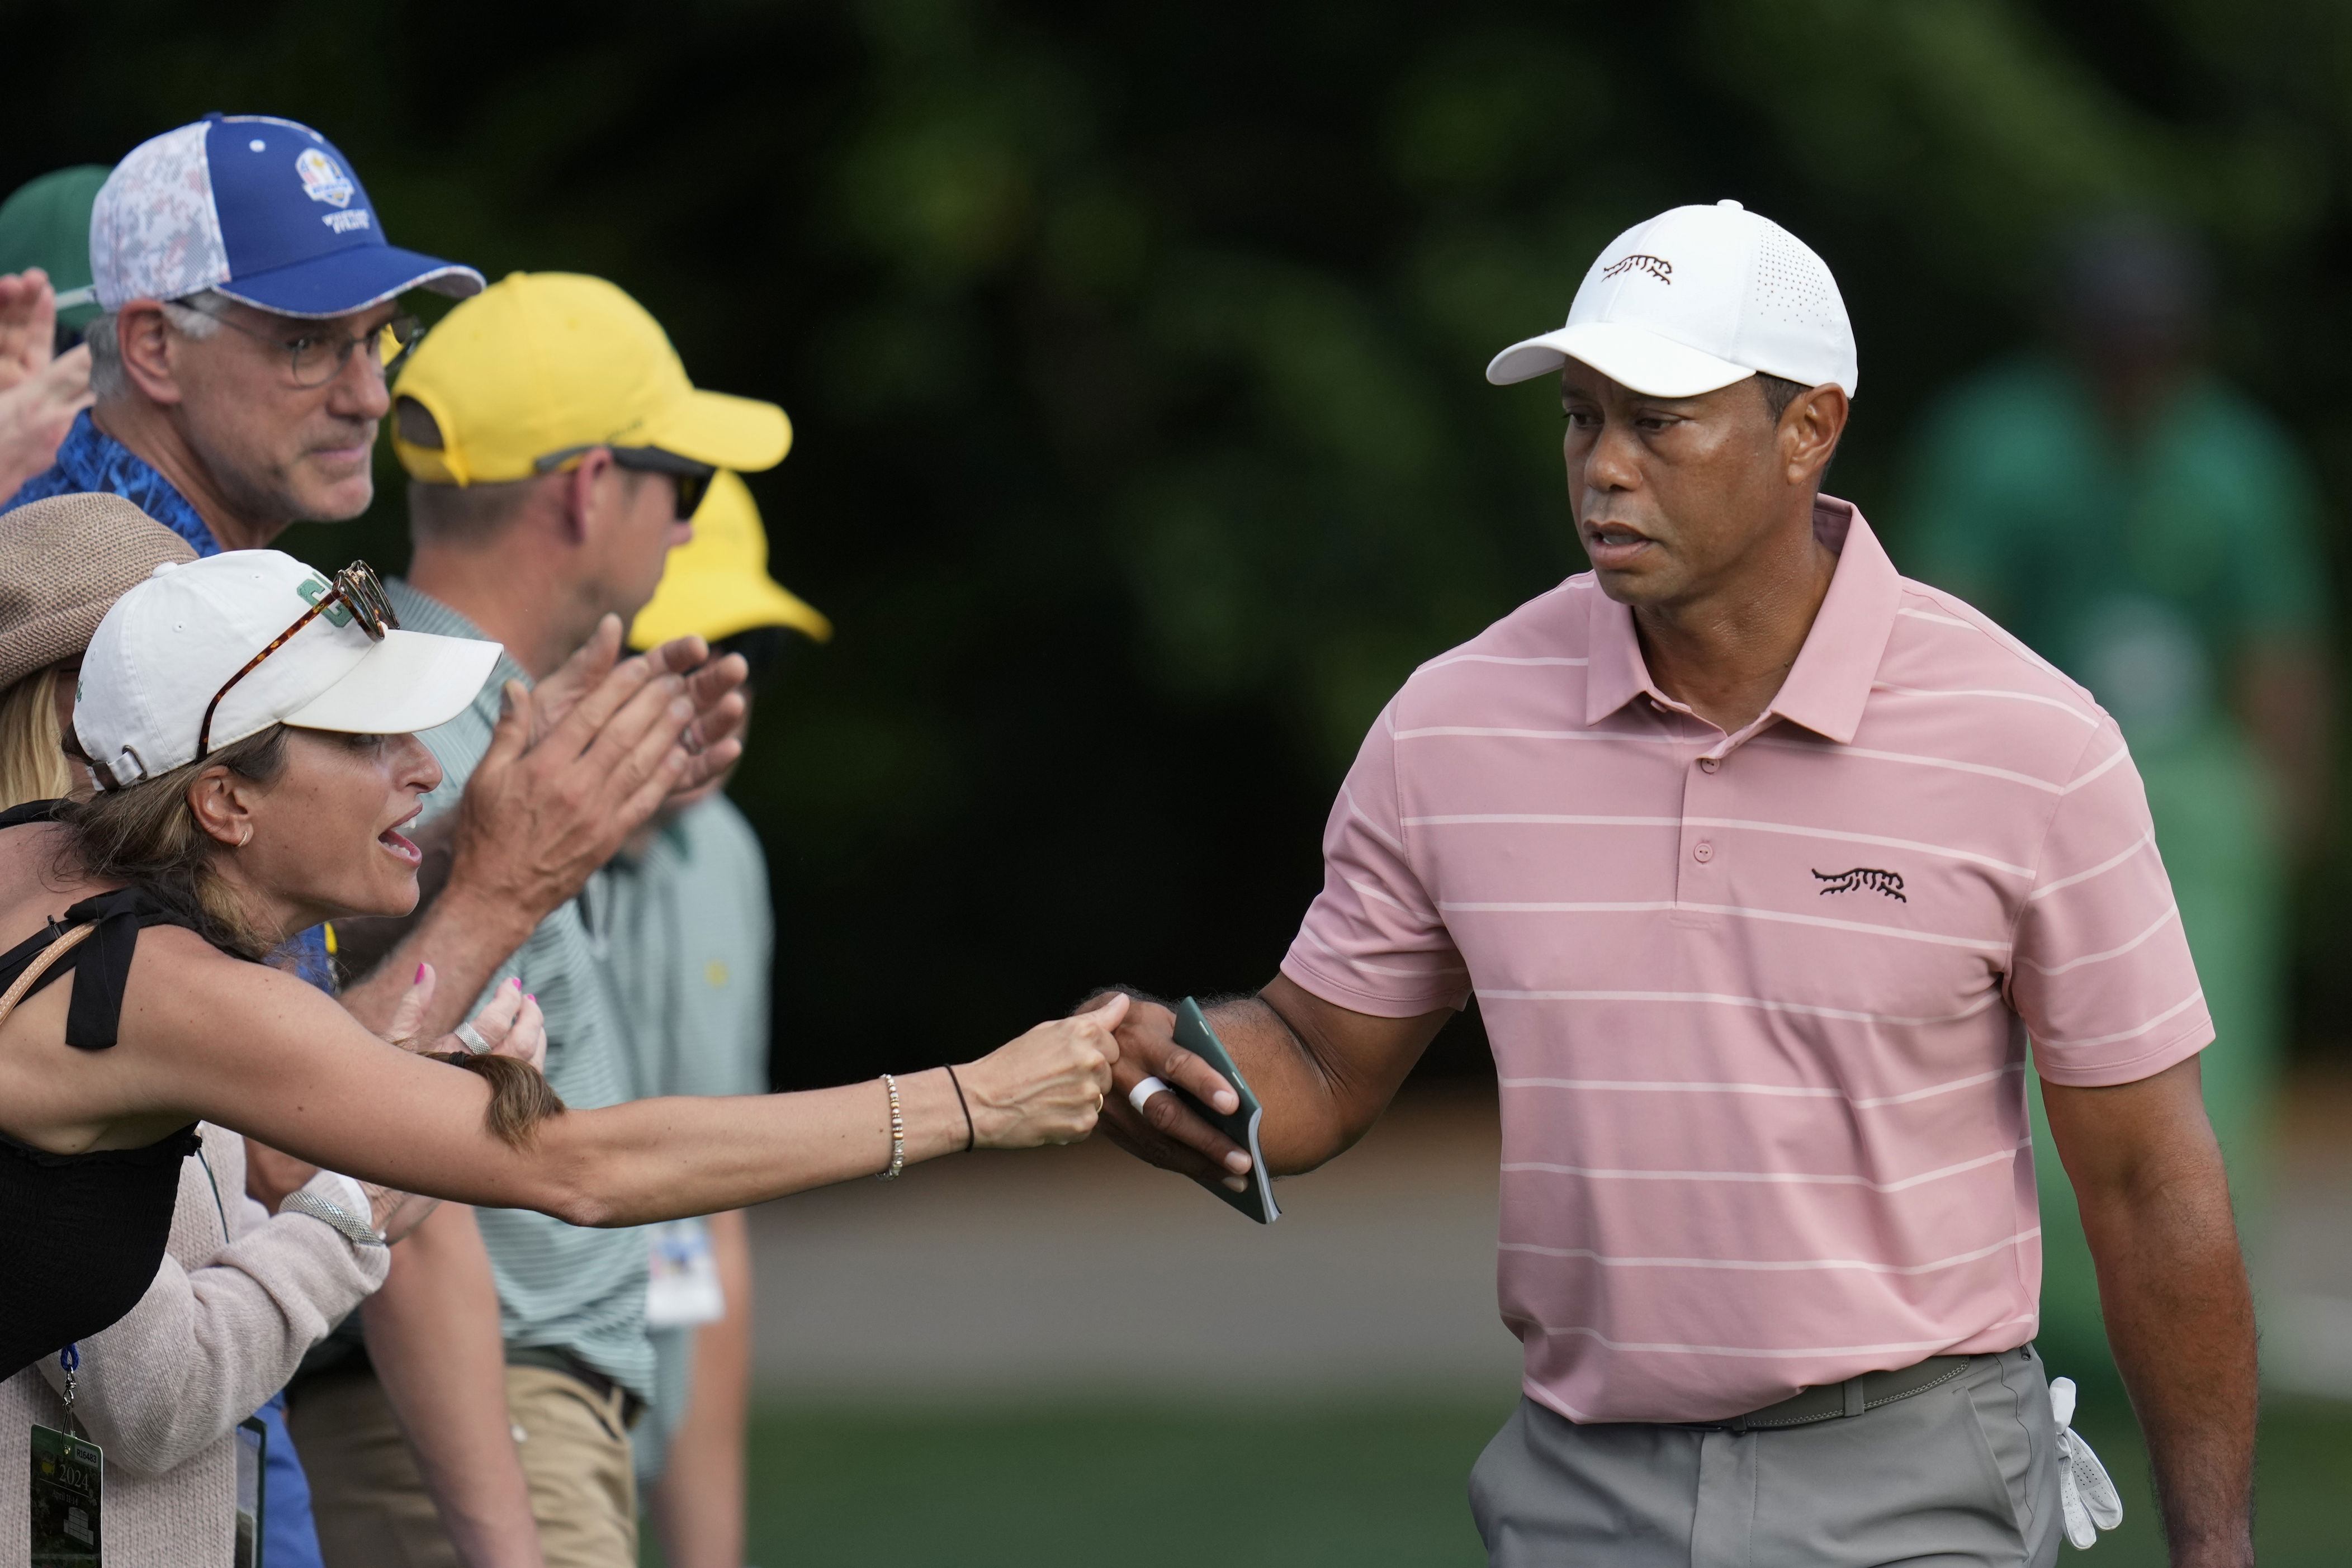 tiger shot sends crowd wild as masters record beckons